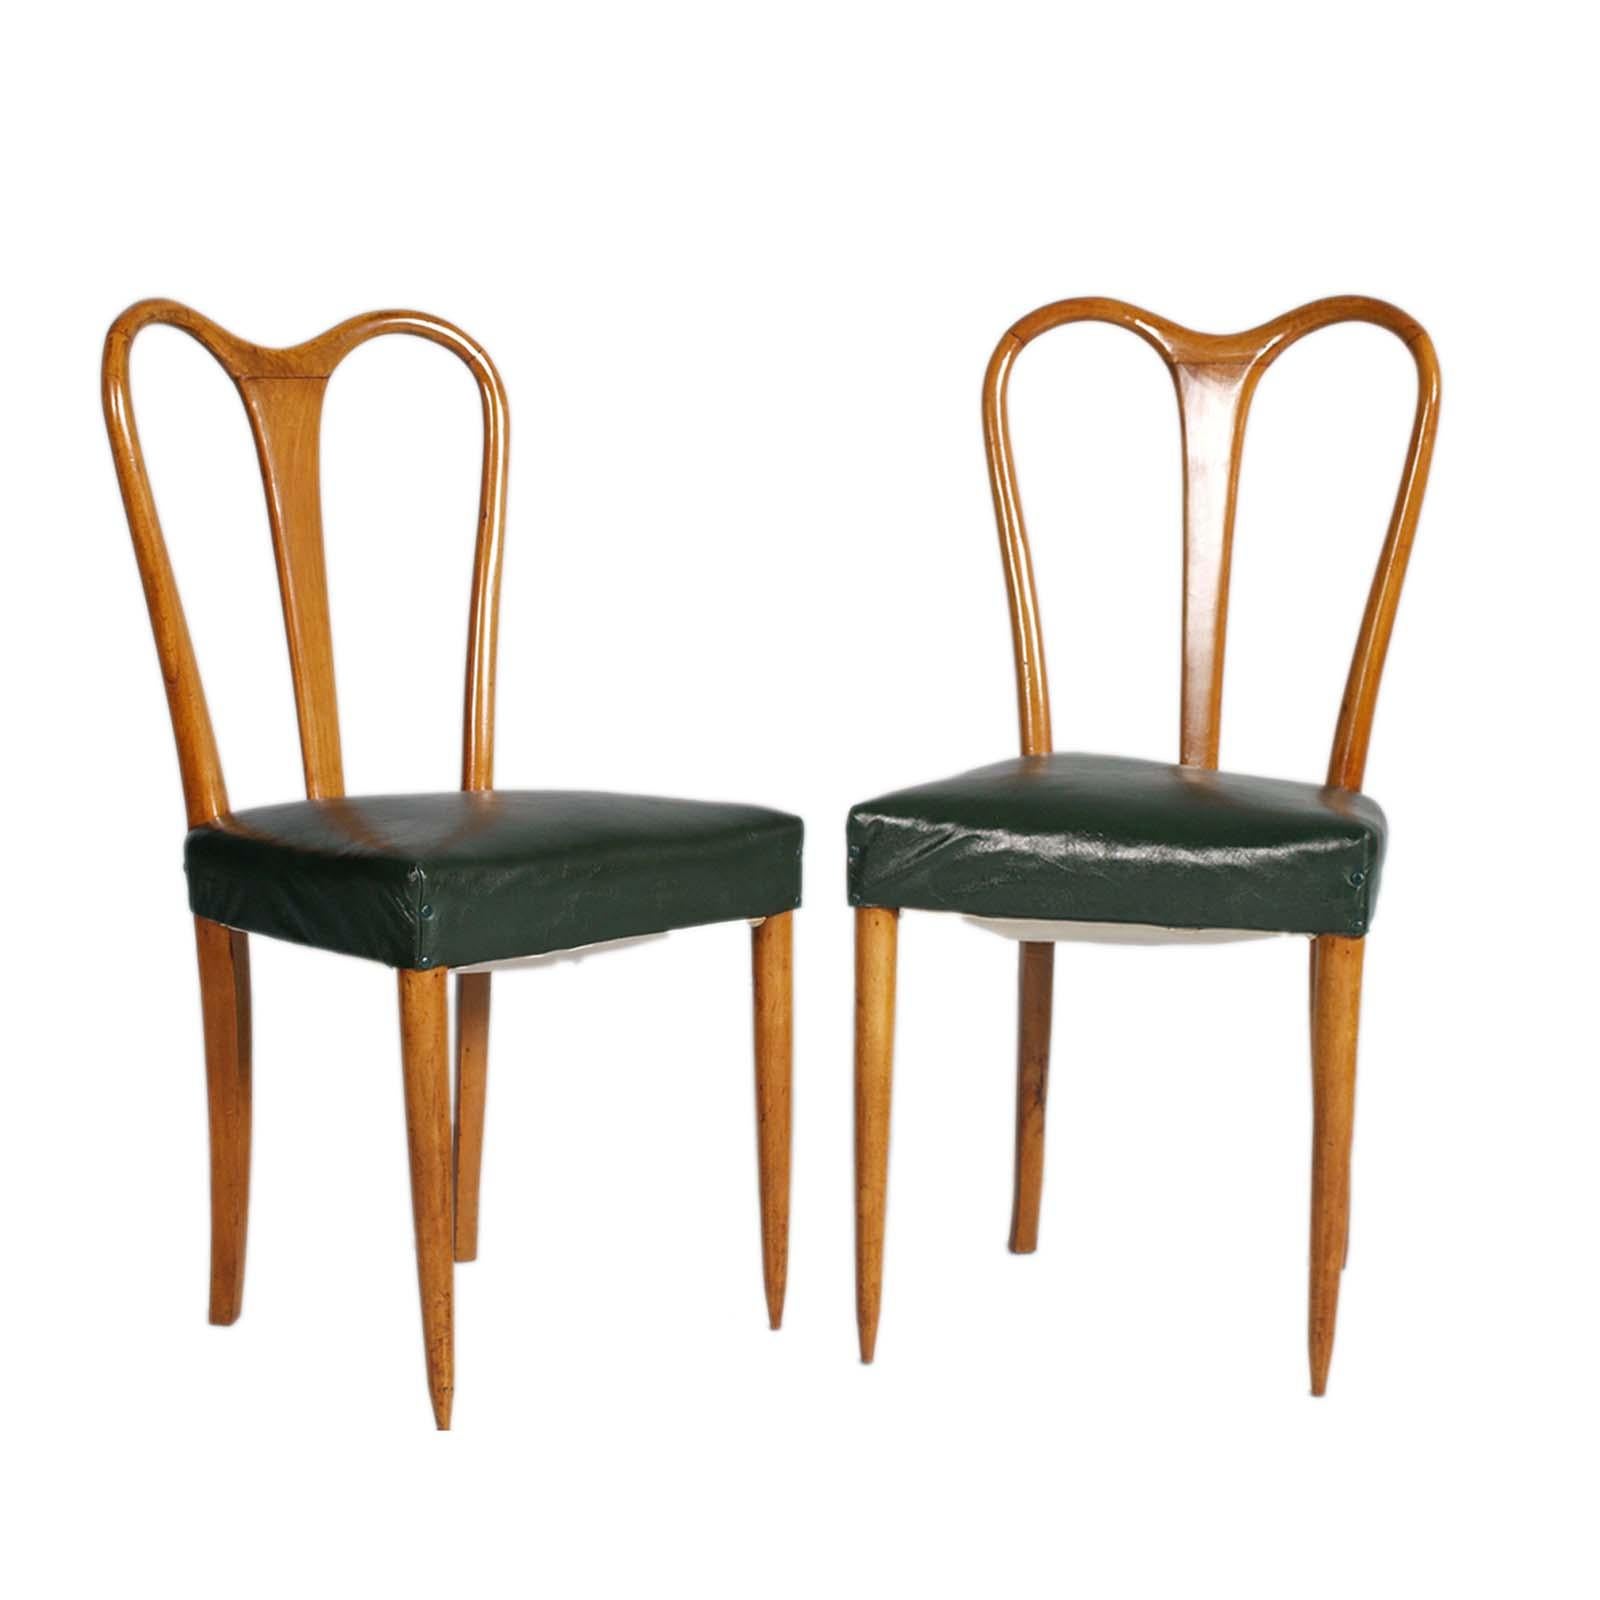 Lacquered Mid-Century Chairs by Ico Parisi for Fratelli Rizzi, Springs Seat & Leatherette For Sale